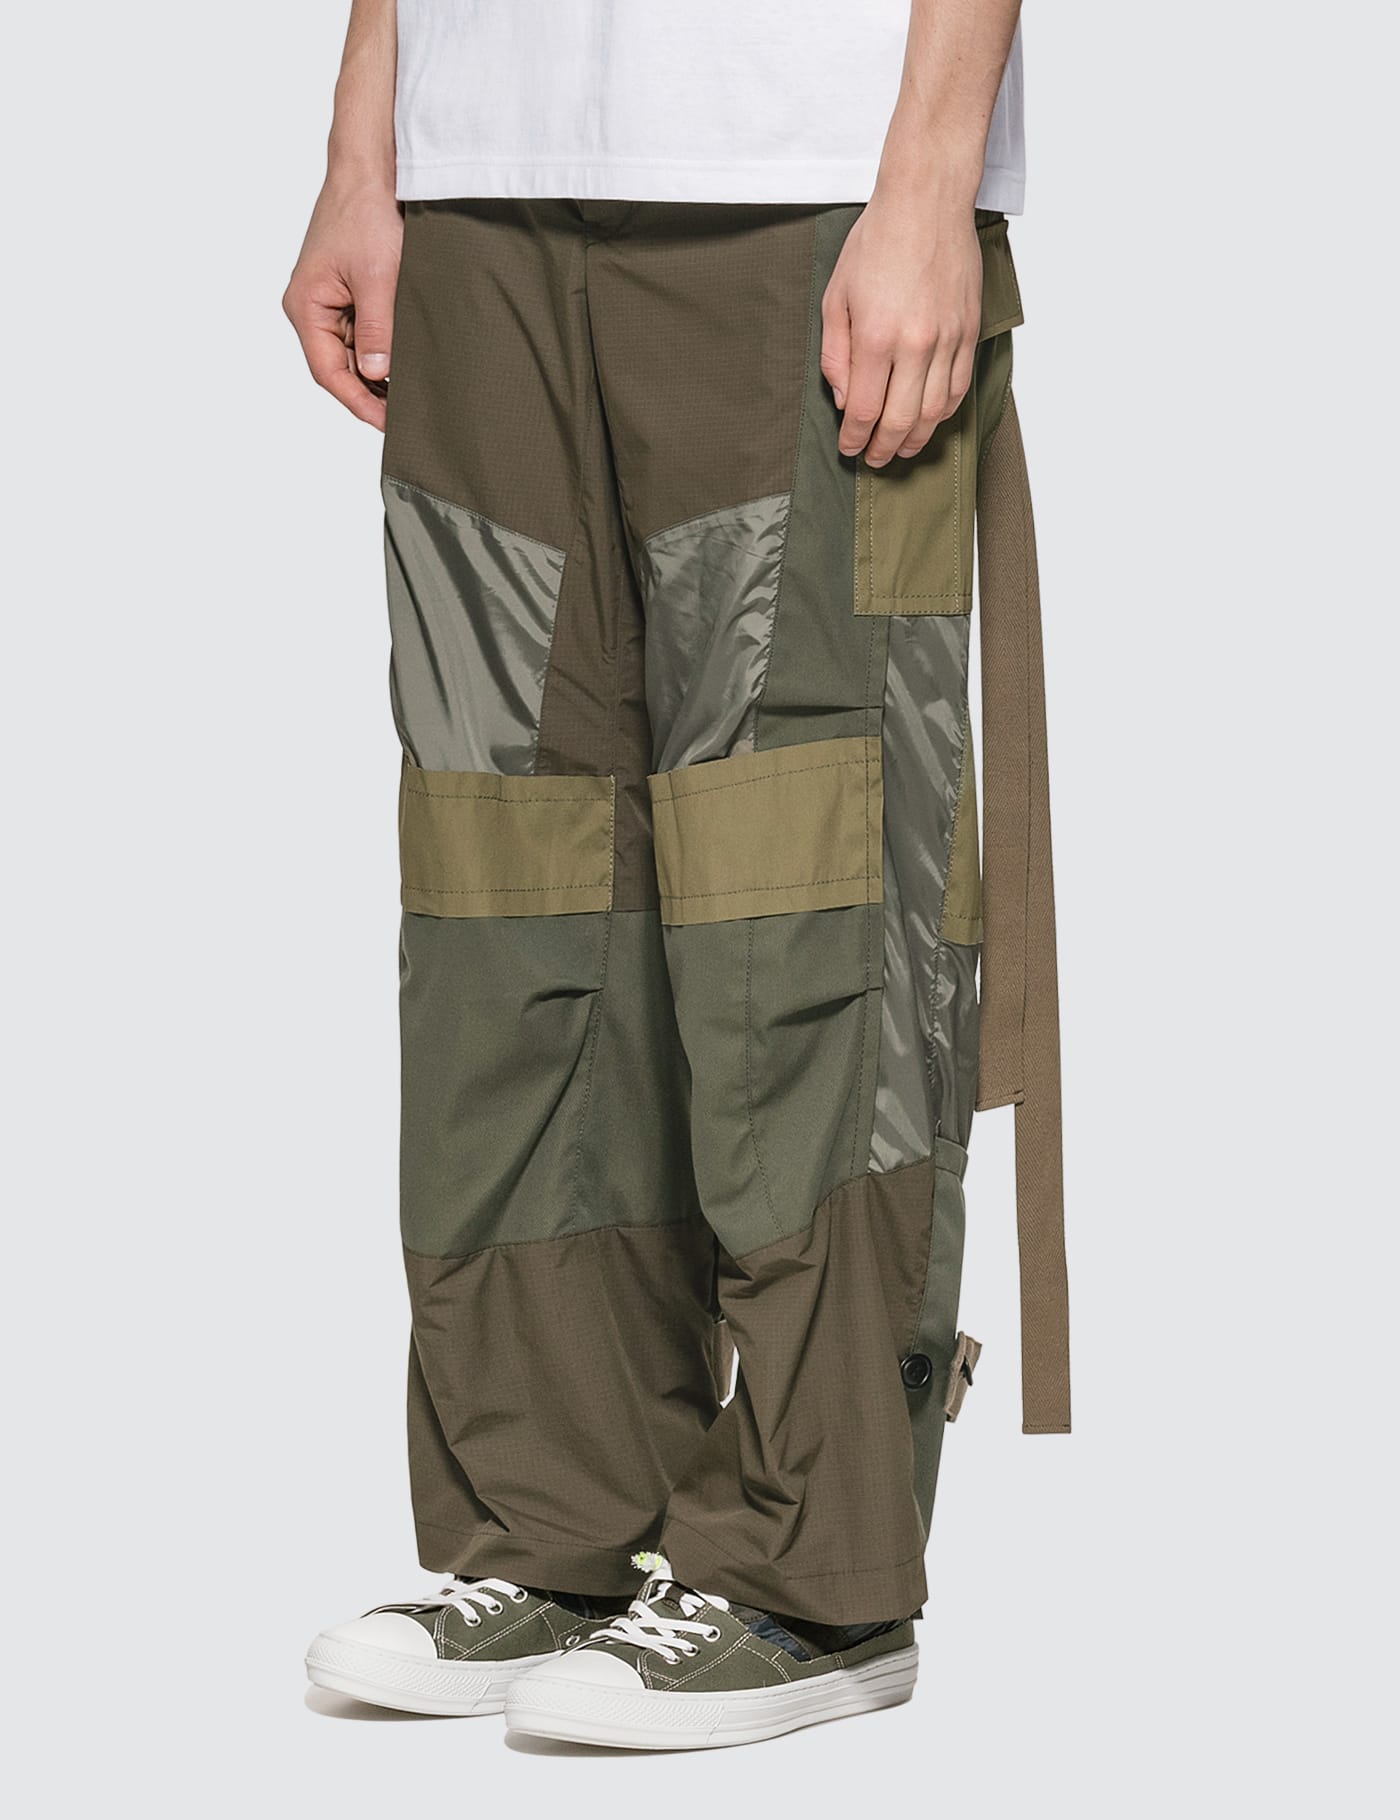 Sacai - Fabric Combo Pants | HBX - Globally Curated Fashion and Lifestyle  by Hypebeast